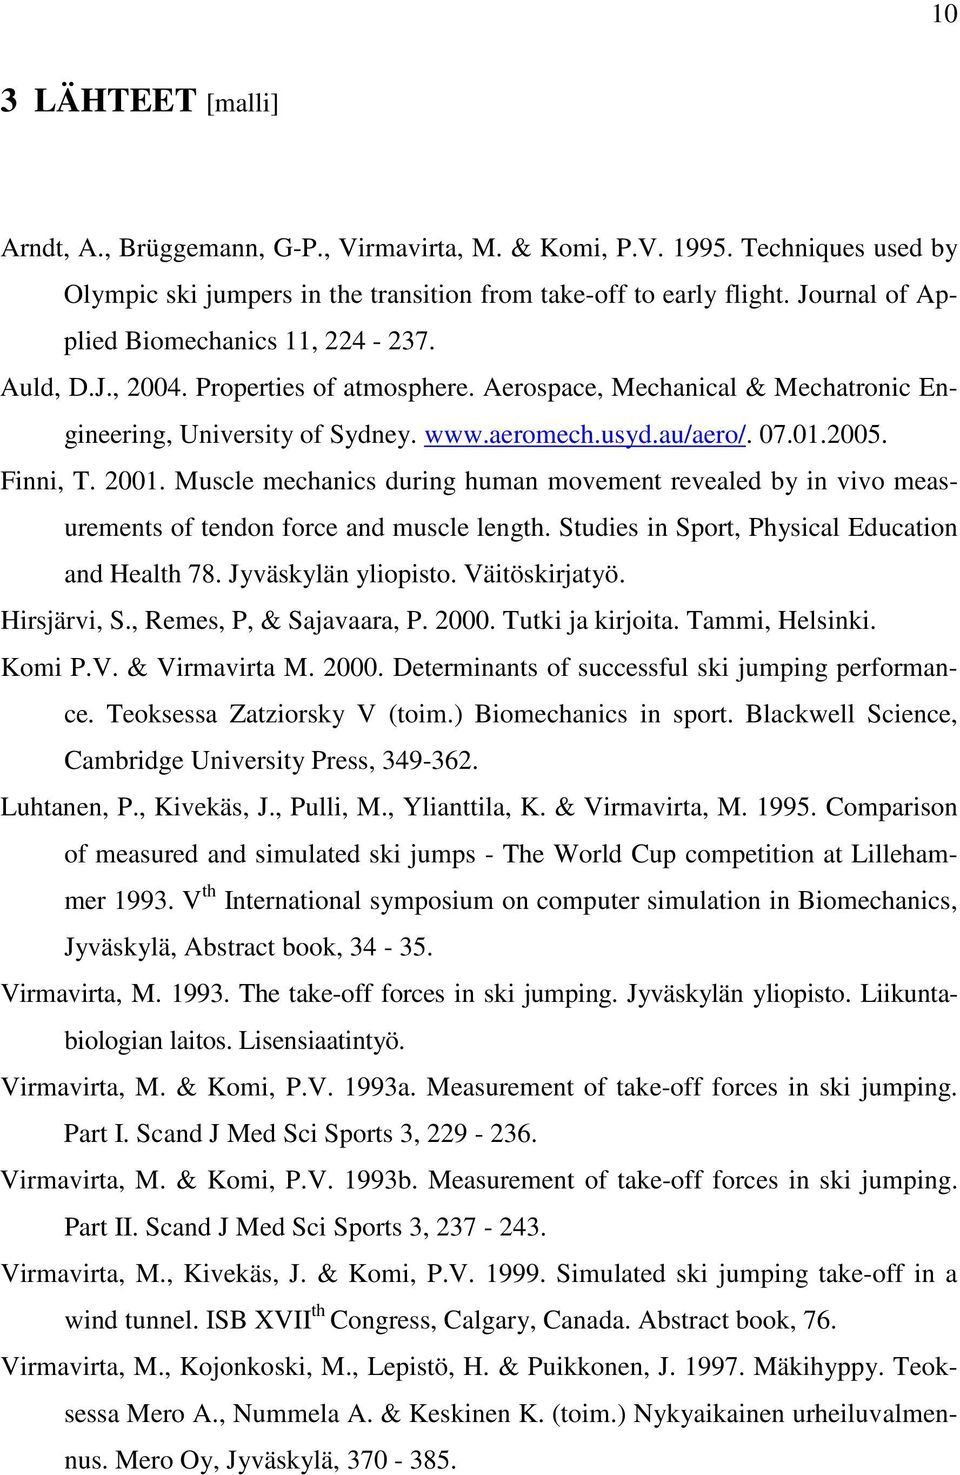 Finni, T. 2001. Muscle mechanics during human movement revealed by in vivo measurements of tendon force and muscle length. Studies in Sport, Physical Education and Health 78. Jyväskylän yliopisto.